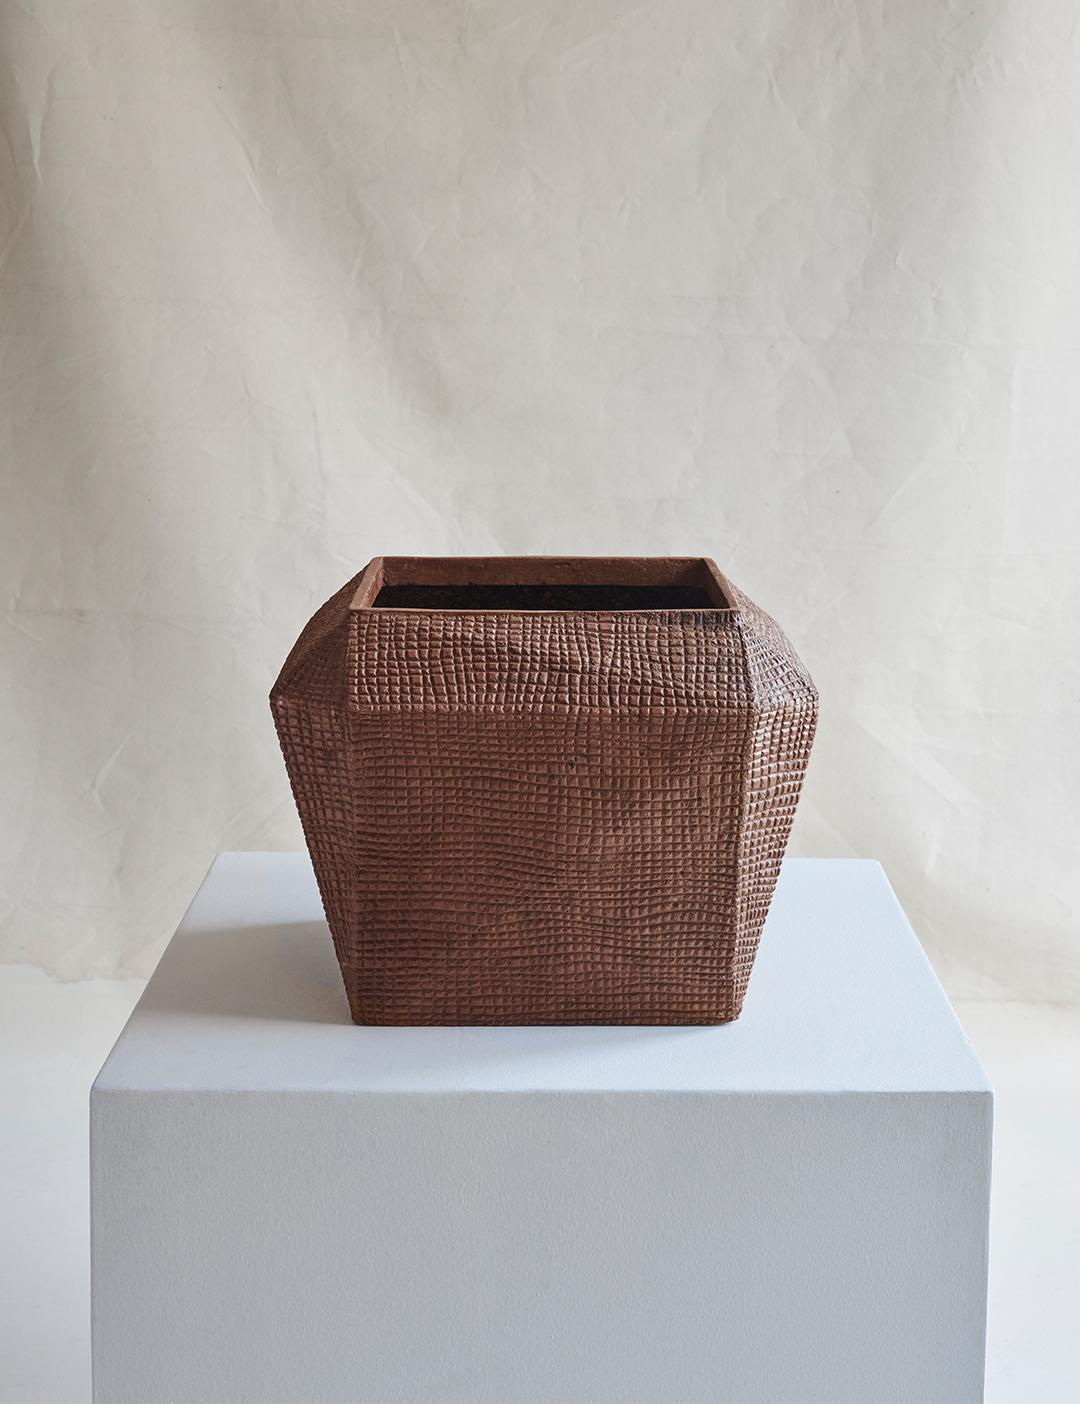 A large, broad geometric square vessel featuring a wide mouth, imprinted with a small repeating tactile texture.

For indoor or outdoor use, in covered environments.

Dimensions (in): 16